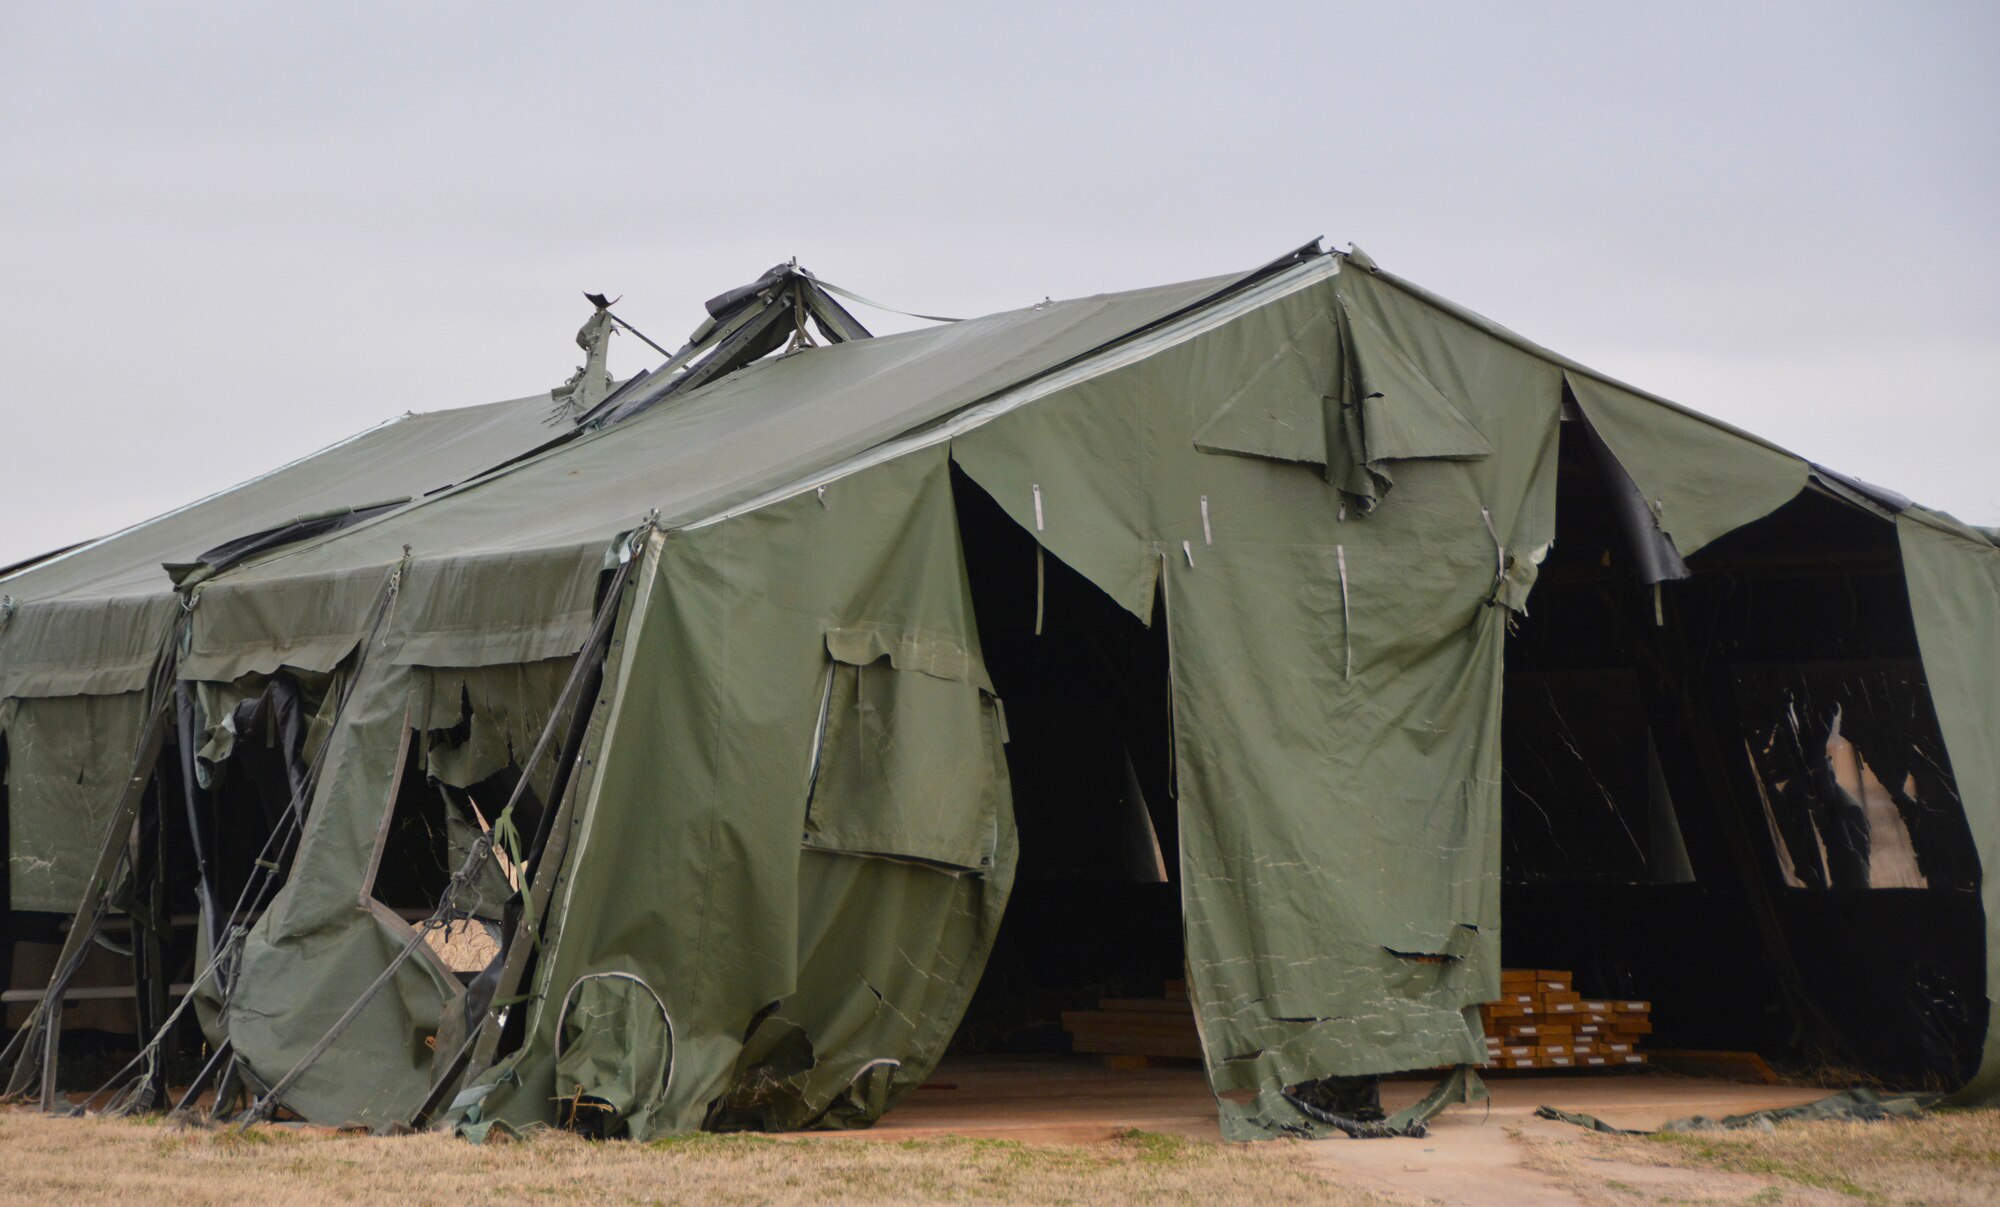 A tent from the Glenwood training area is damaged and weathered here Feb. 26. Members of the 507th Civil Engineer Squadron improved the area by building three new Quonset huts here February 26. The new Quonset huts are more permanent, cheaper, and fully equipped with electric, heating and air. The improvements will make readiness training exercises on the site more efficient, according to members of the wing inspection team. (U.S. Air Force Photo by Maj. Jon Quinlan)